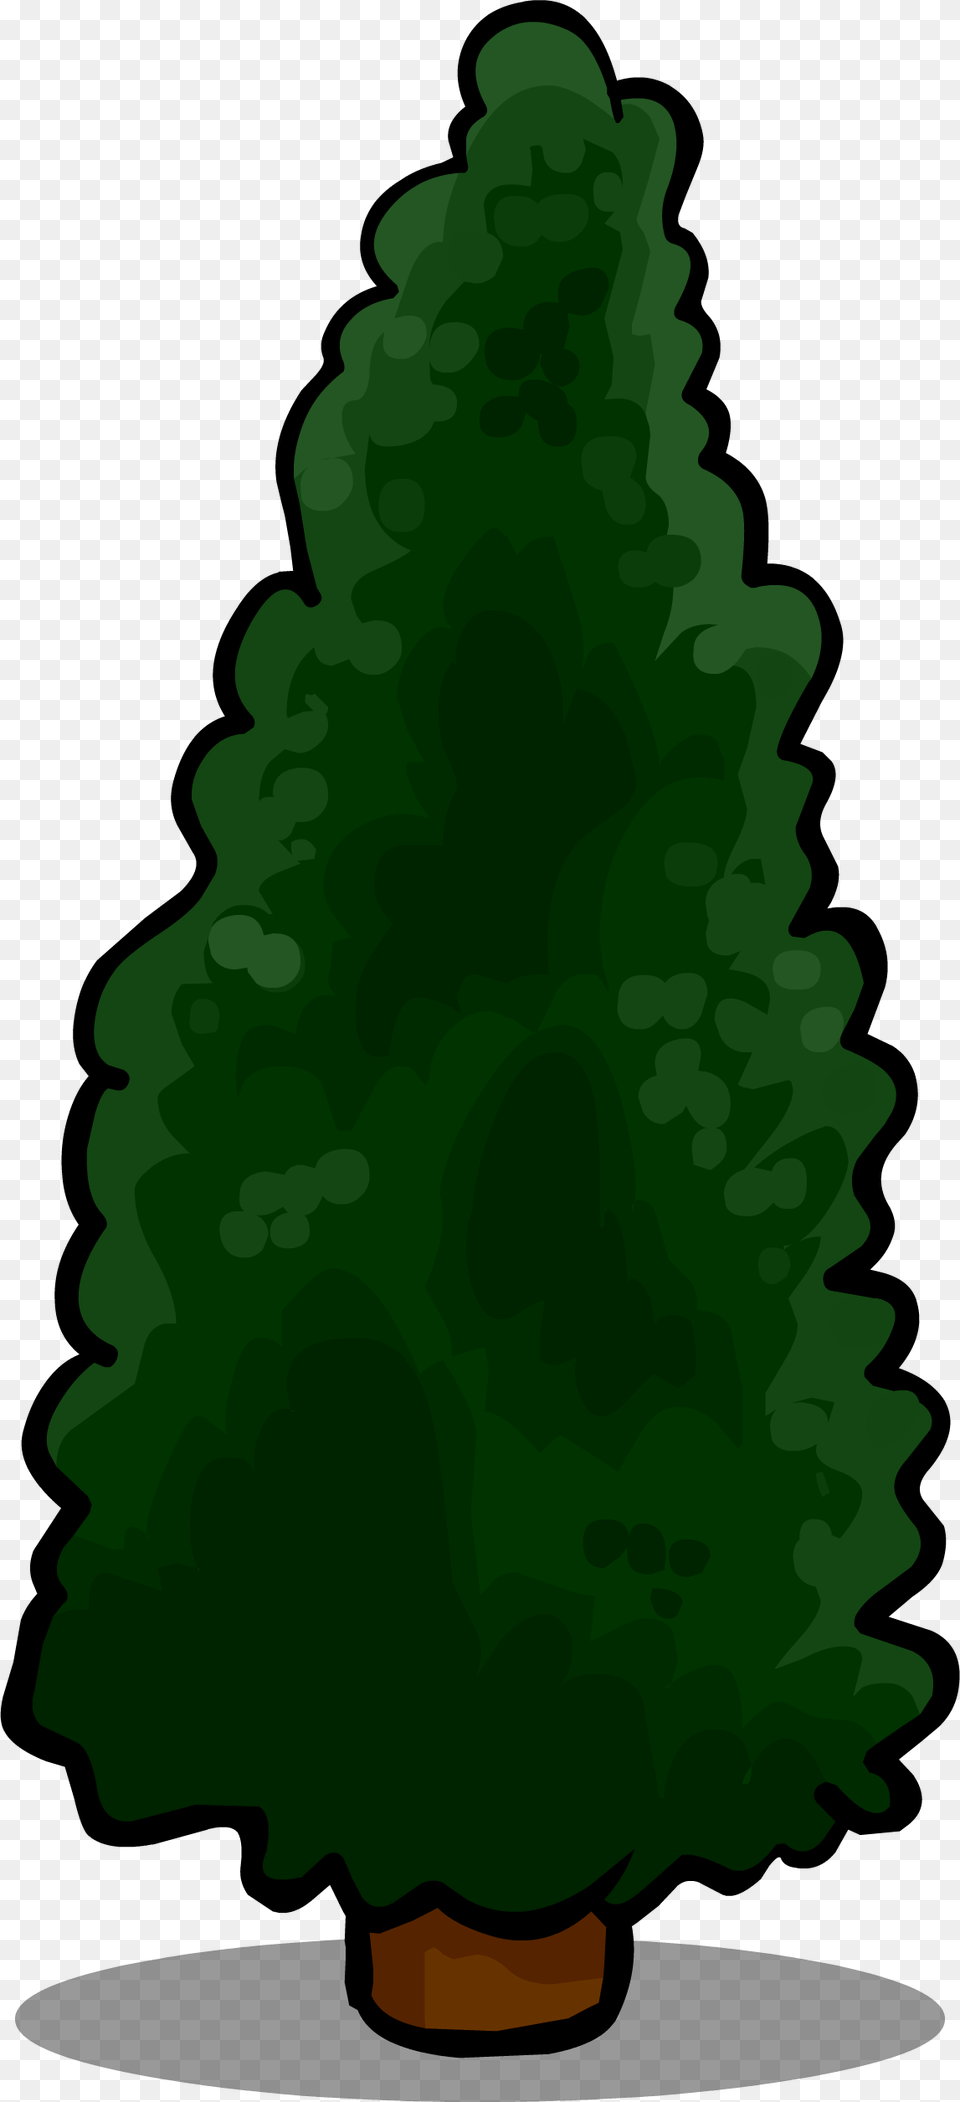 Hedge Clipart Club Penguin Tree Furniture, Fir, Green, Pine, Plant Png Image